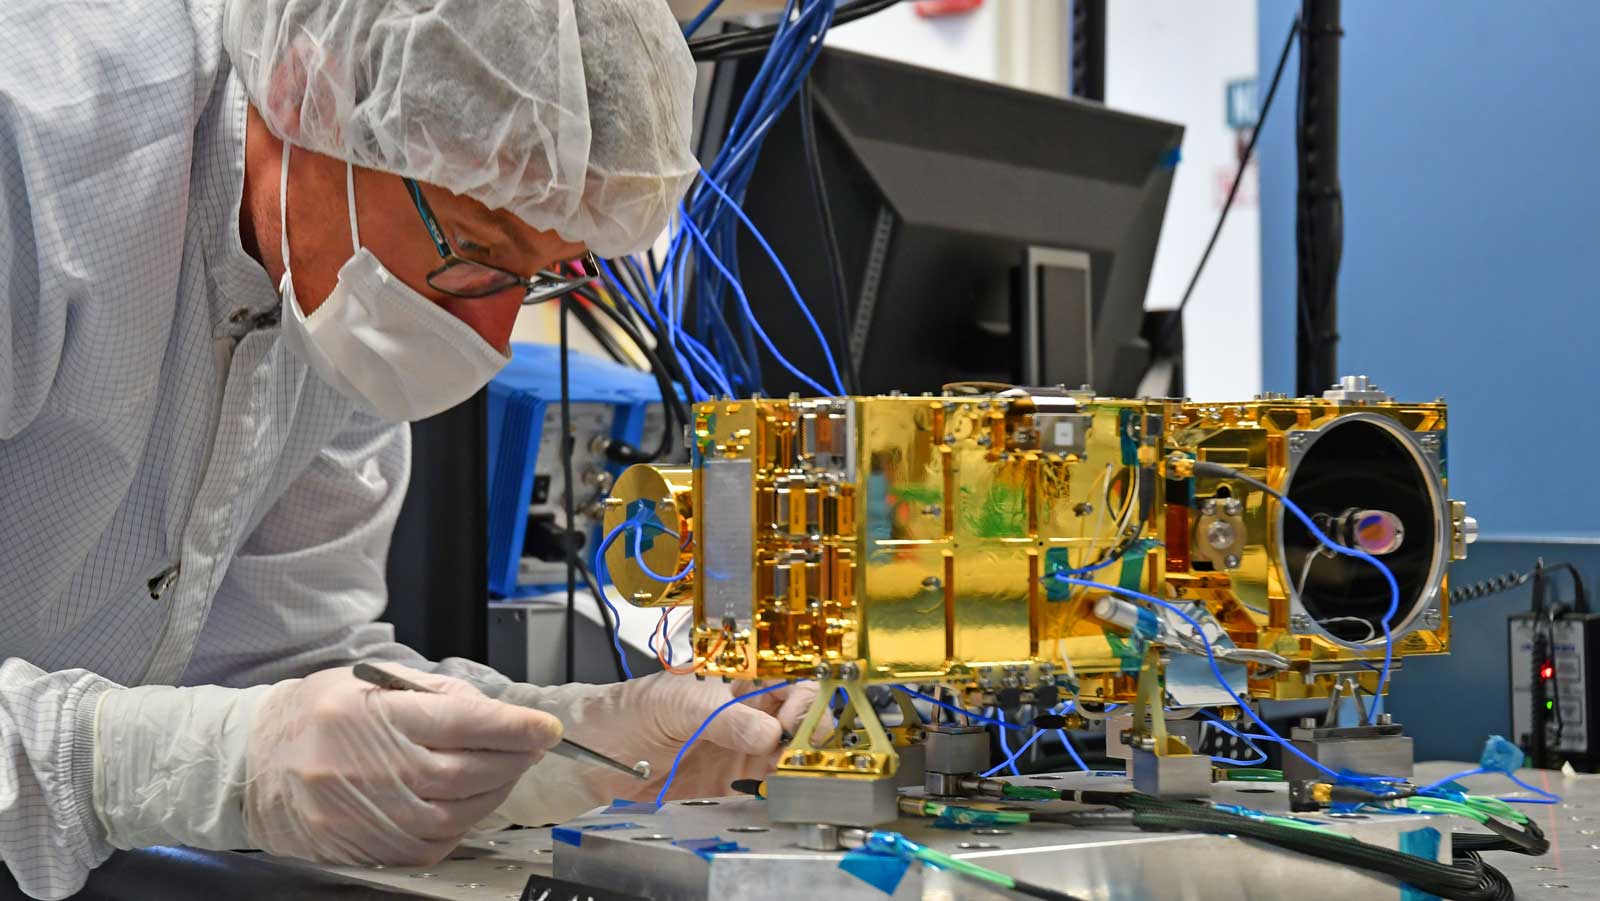 The Mast Unit for Mars 2020's SuperCam, shown being tested here, will use a laser to vaporize and study rock material on the Red Planet's surface.